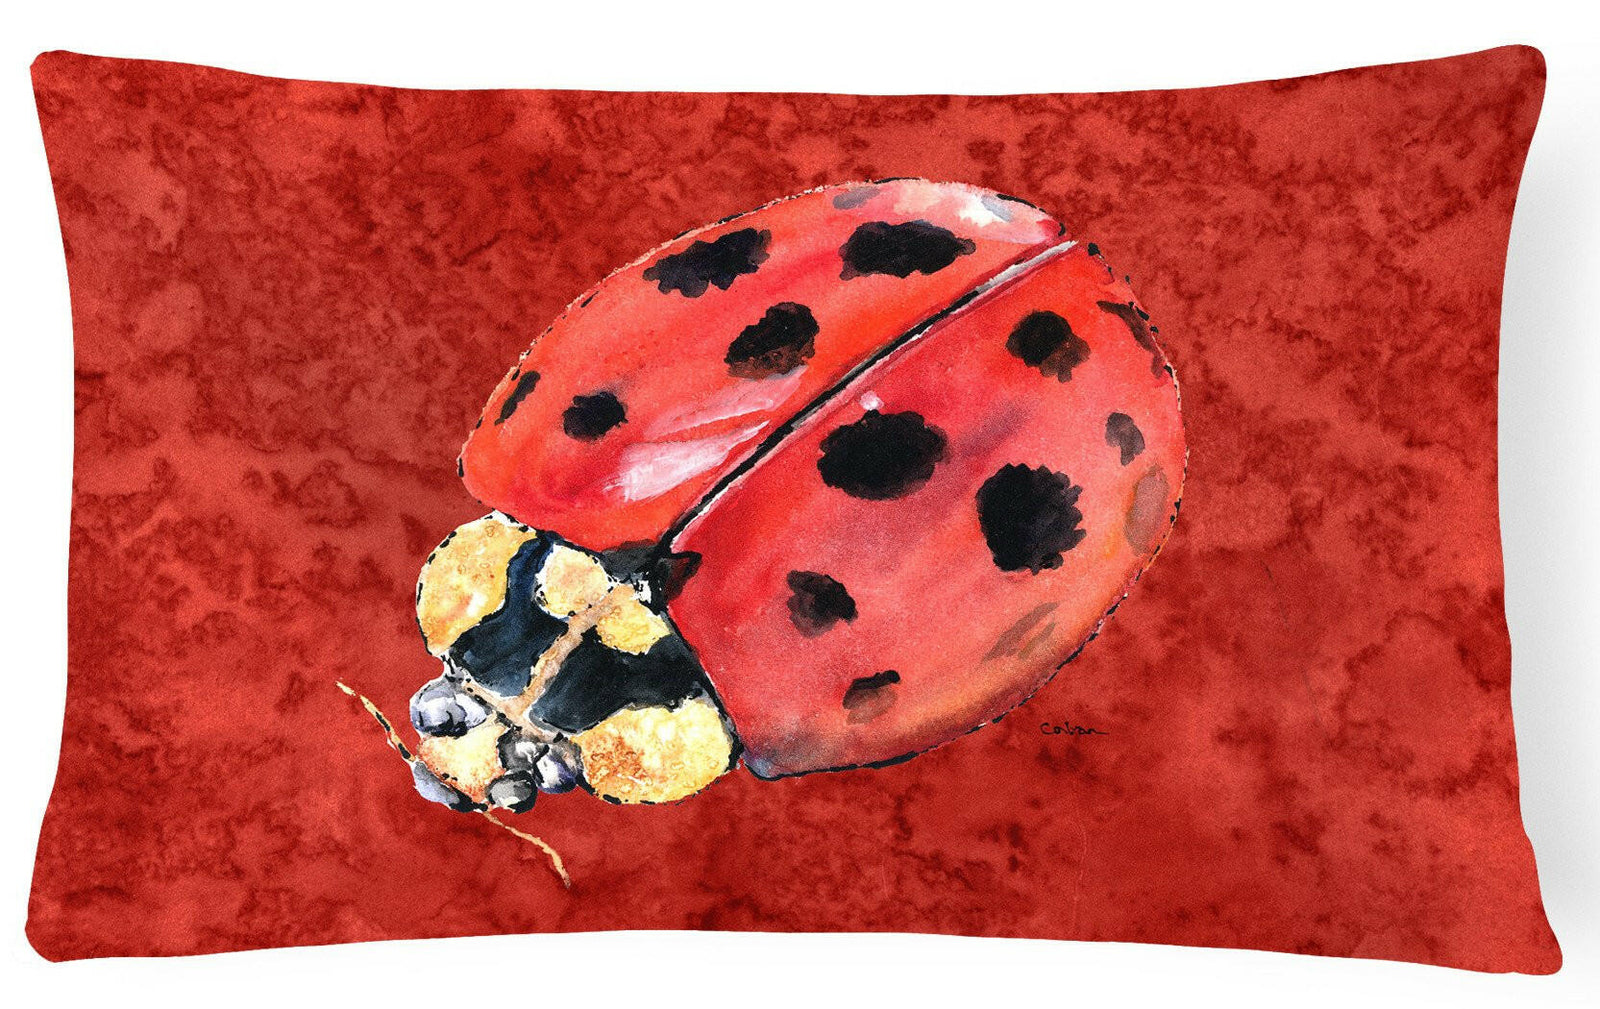 Lady Bug on Deep Red   Canvas Fabric Decorative Pillow by Caroline's Treasures